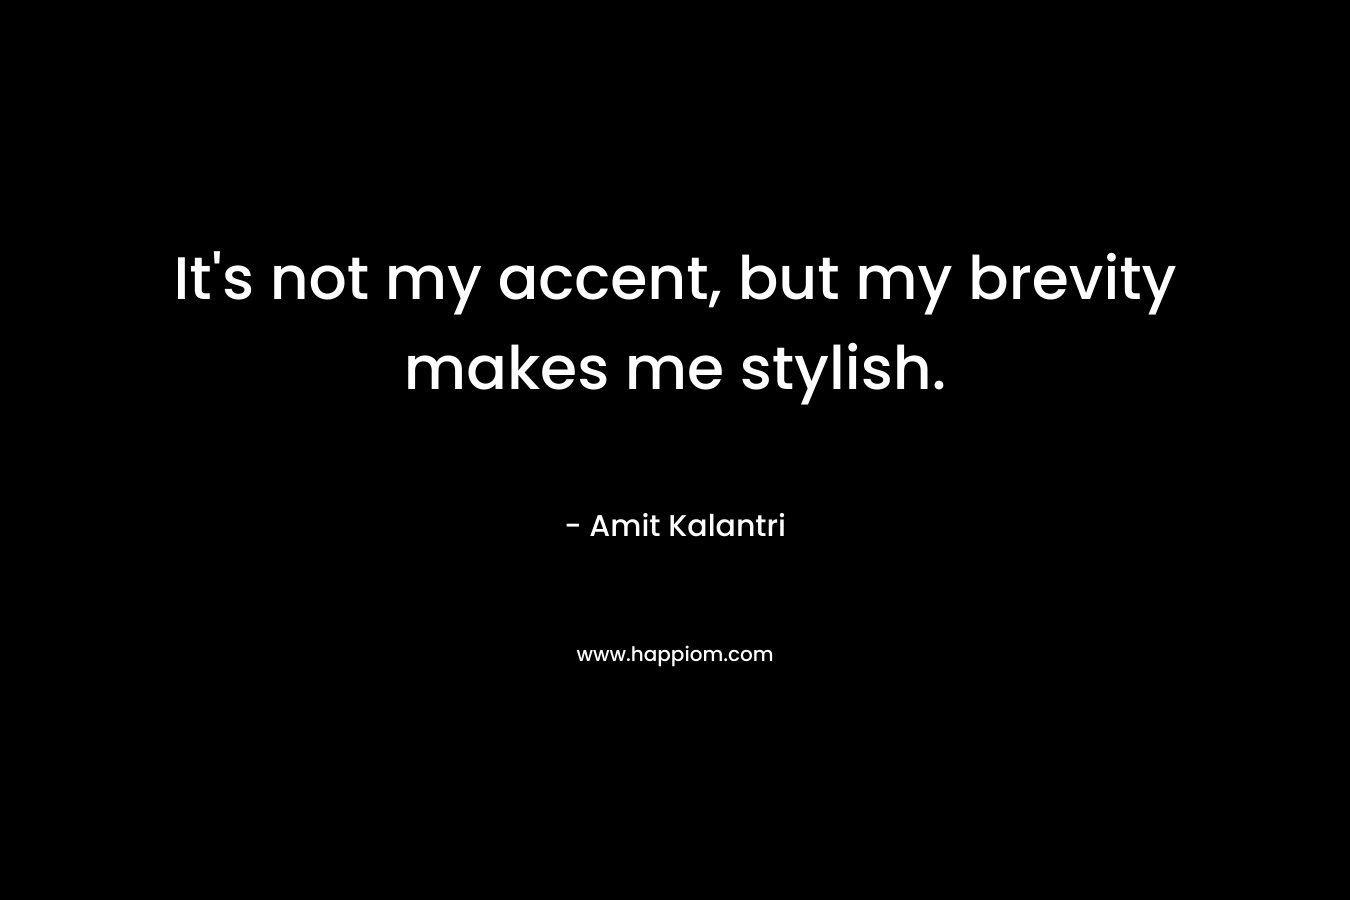 It's not my accent, but my brevity makes me stylish.